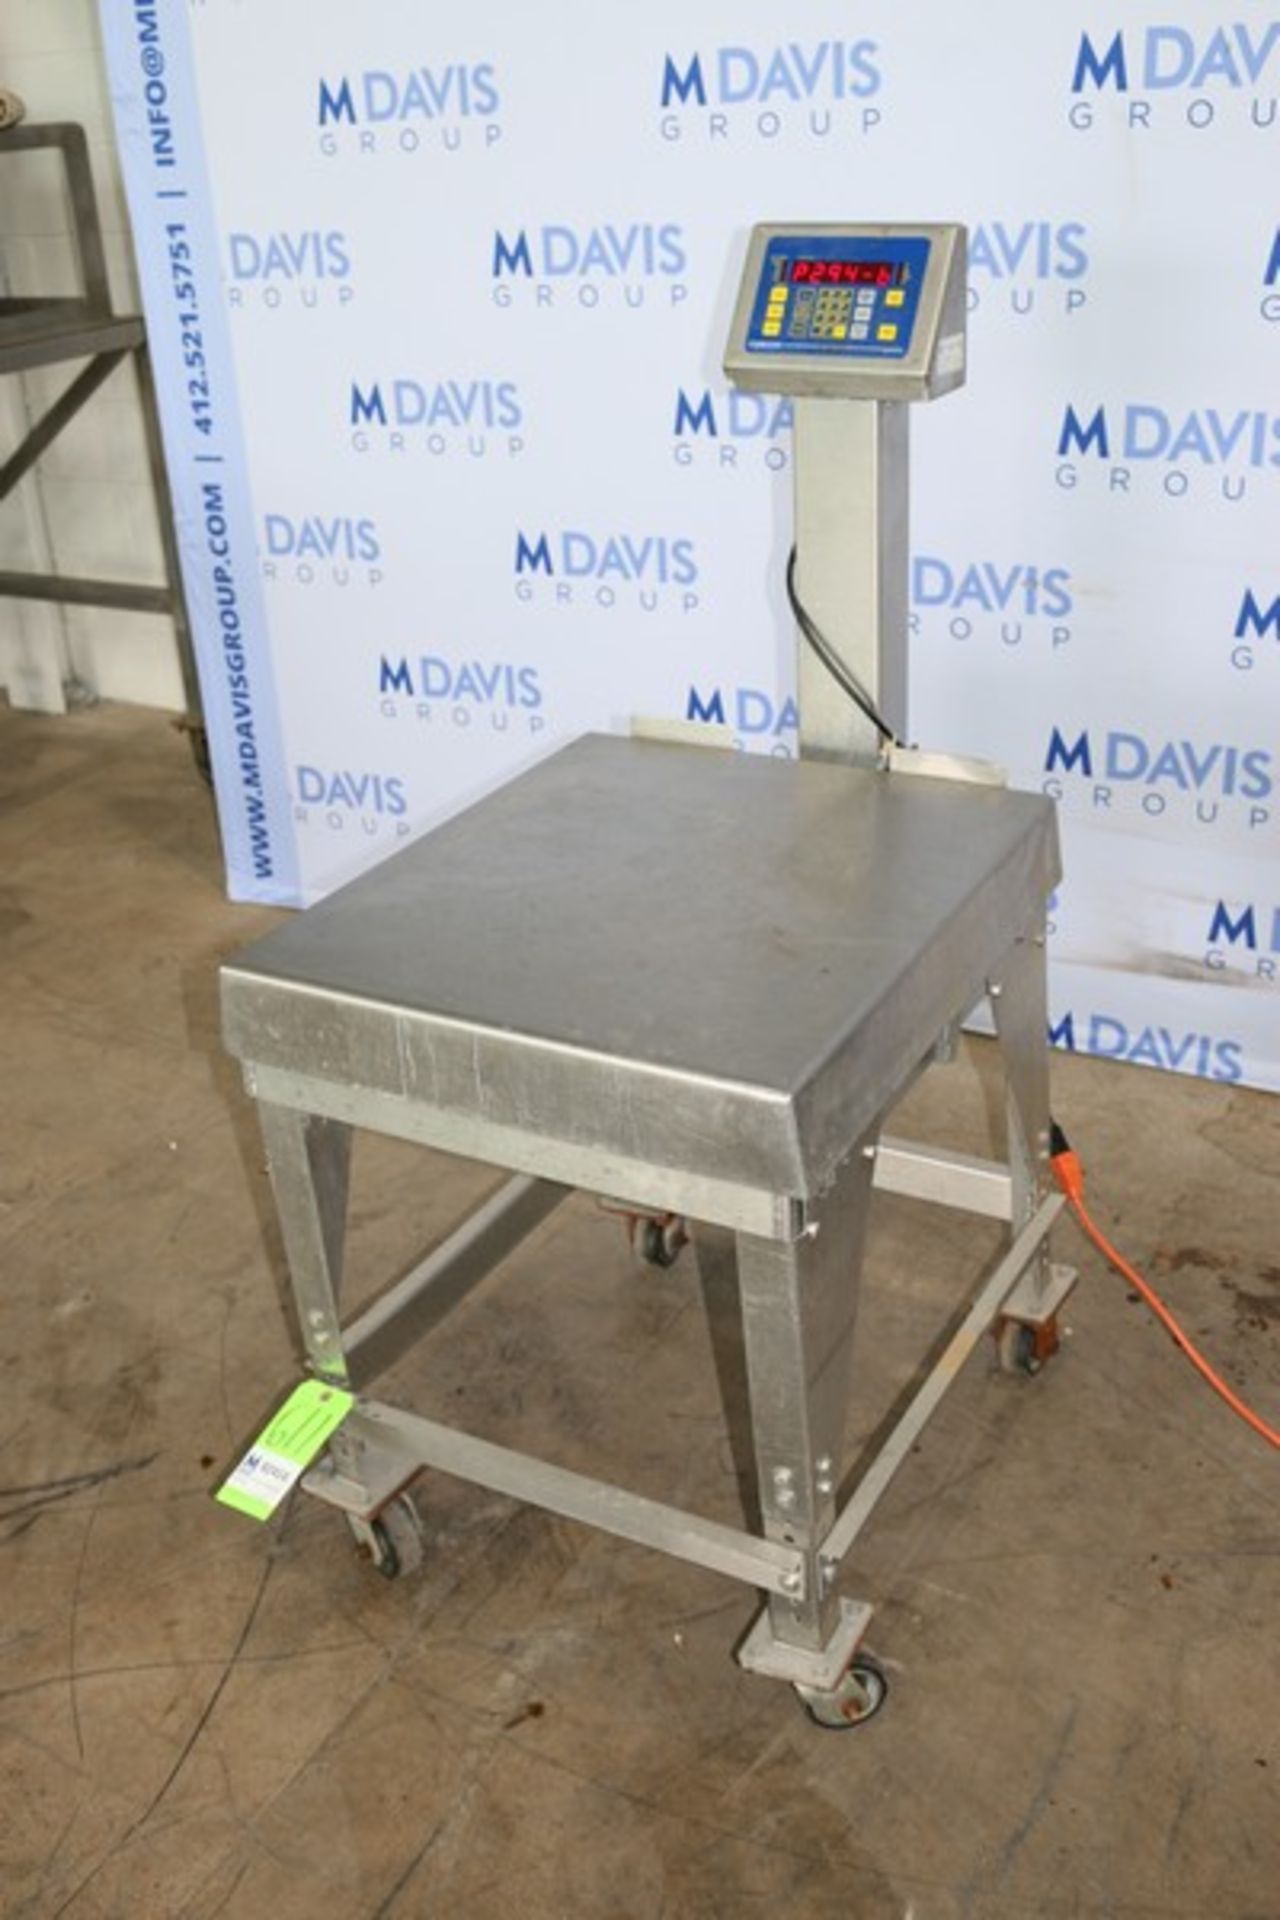 Fairbanks S/S Platform Scale,with Aprox. 28" L x 23-1/2" W, Mounted on S/S Portable Frame, with